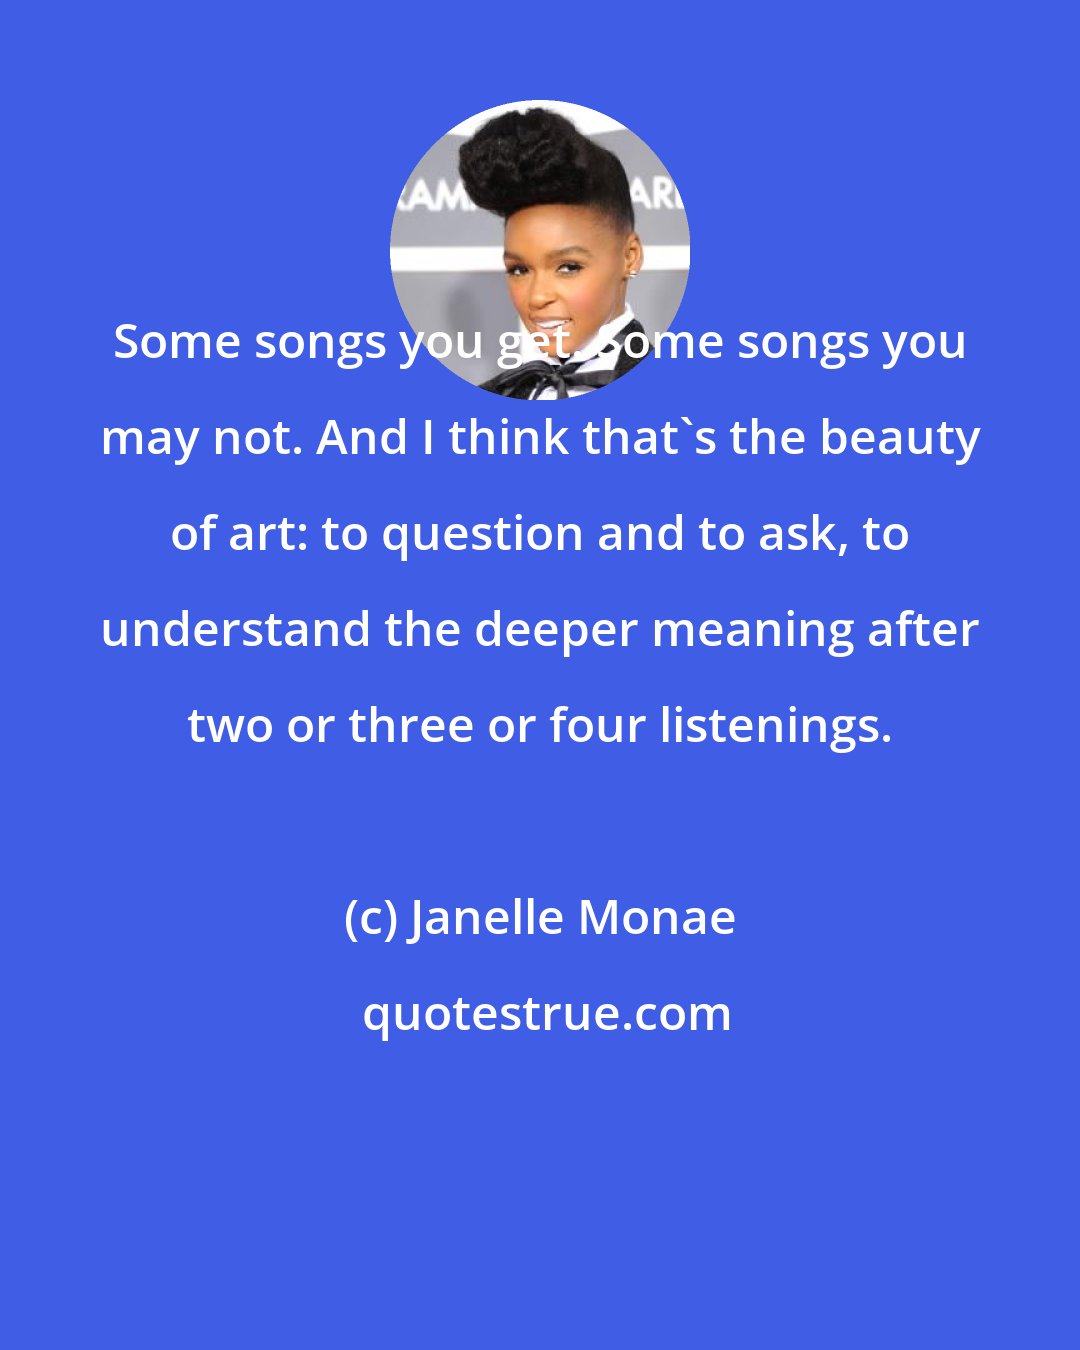 Janelle Monae: Some songs you get. Some songs you may not. And I think that's the beauty of art: to question and to ask, to understand the deeper meaning after two or three or four listenings.